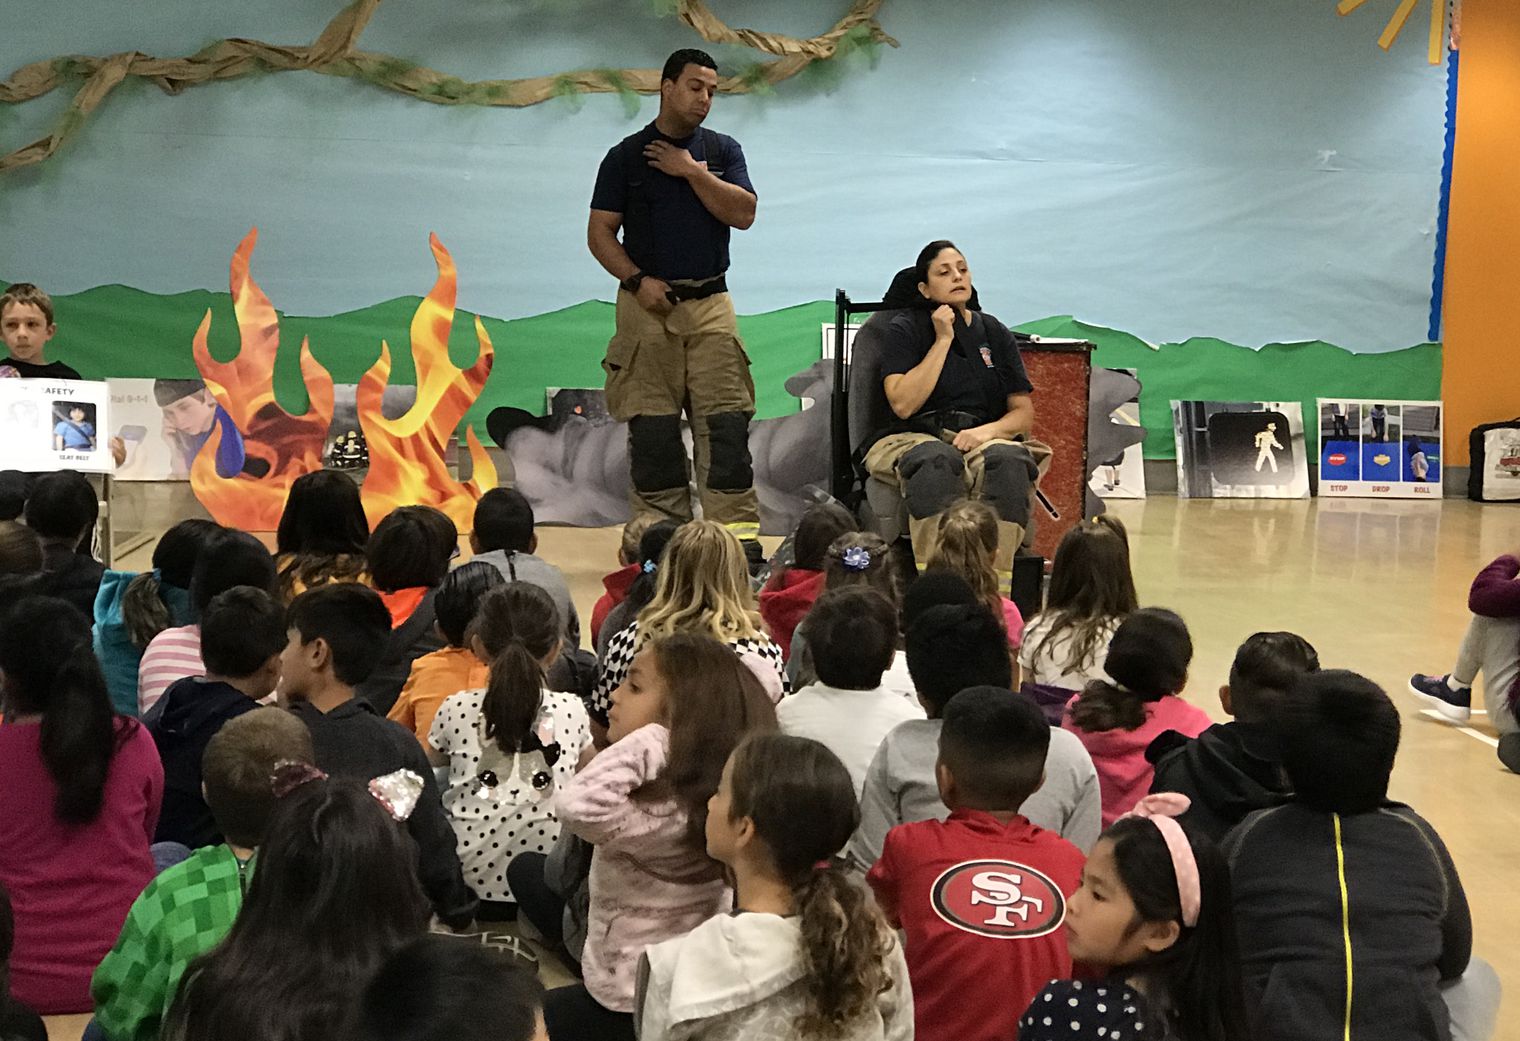 Firefighters putting on an assembly